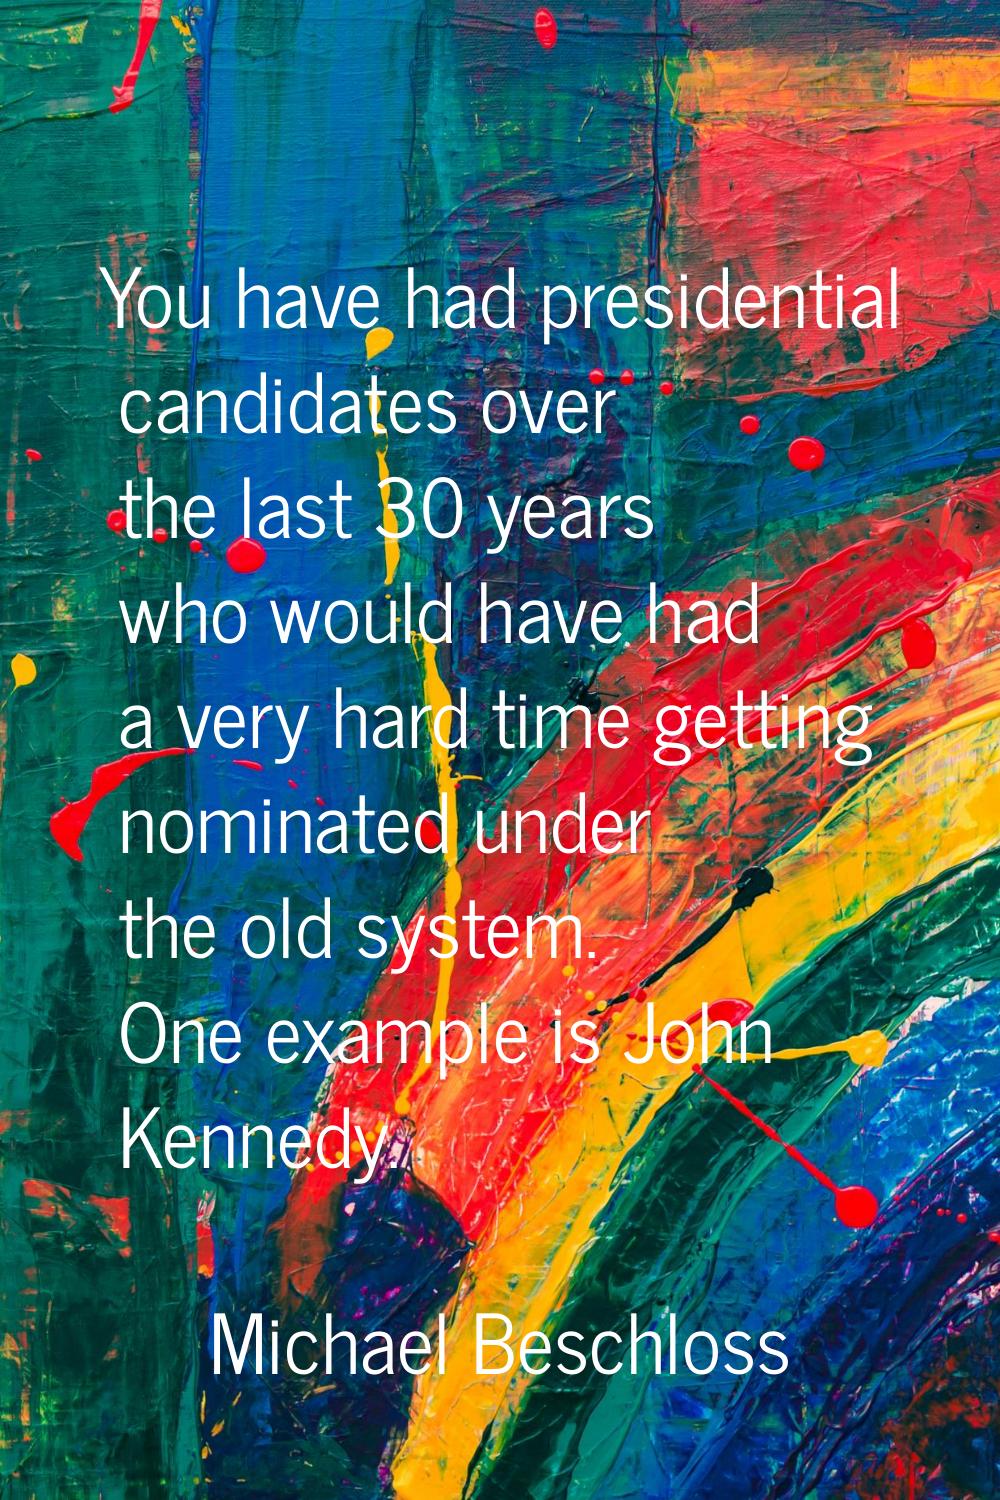 You have had presidential candidates over the last 30 years who would have had a very hard time get